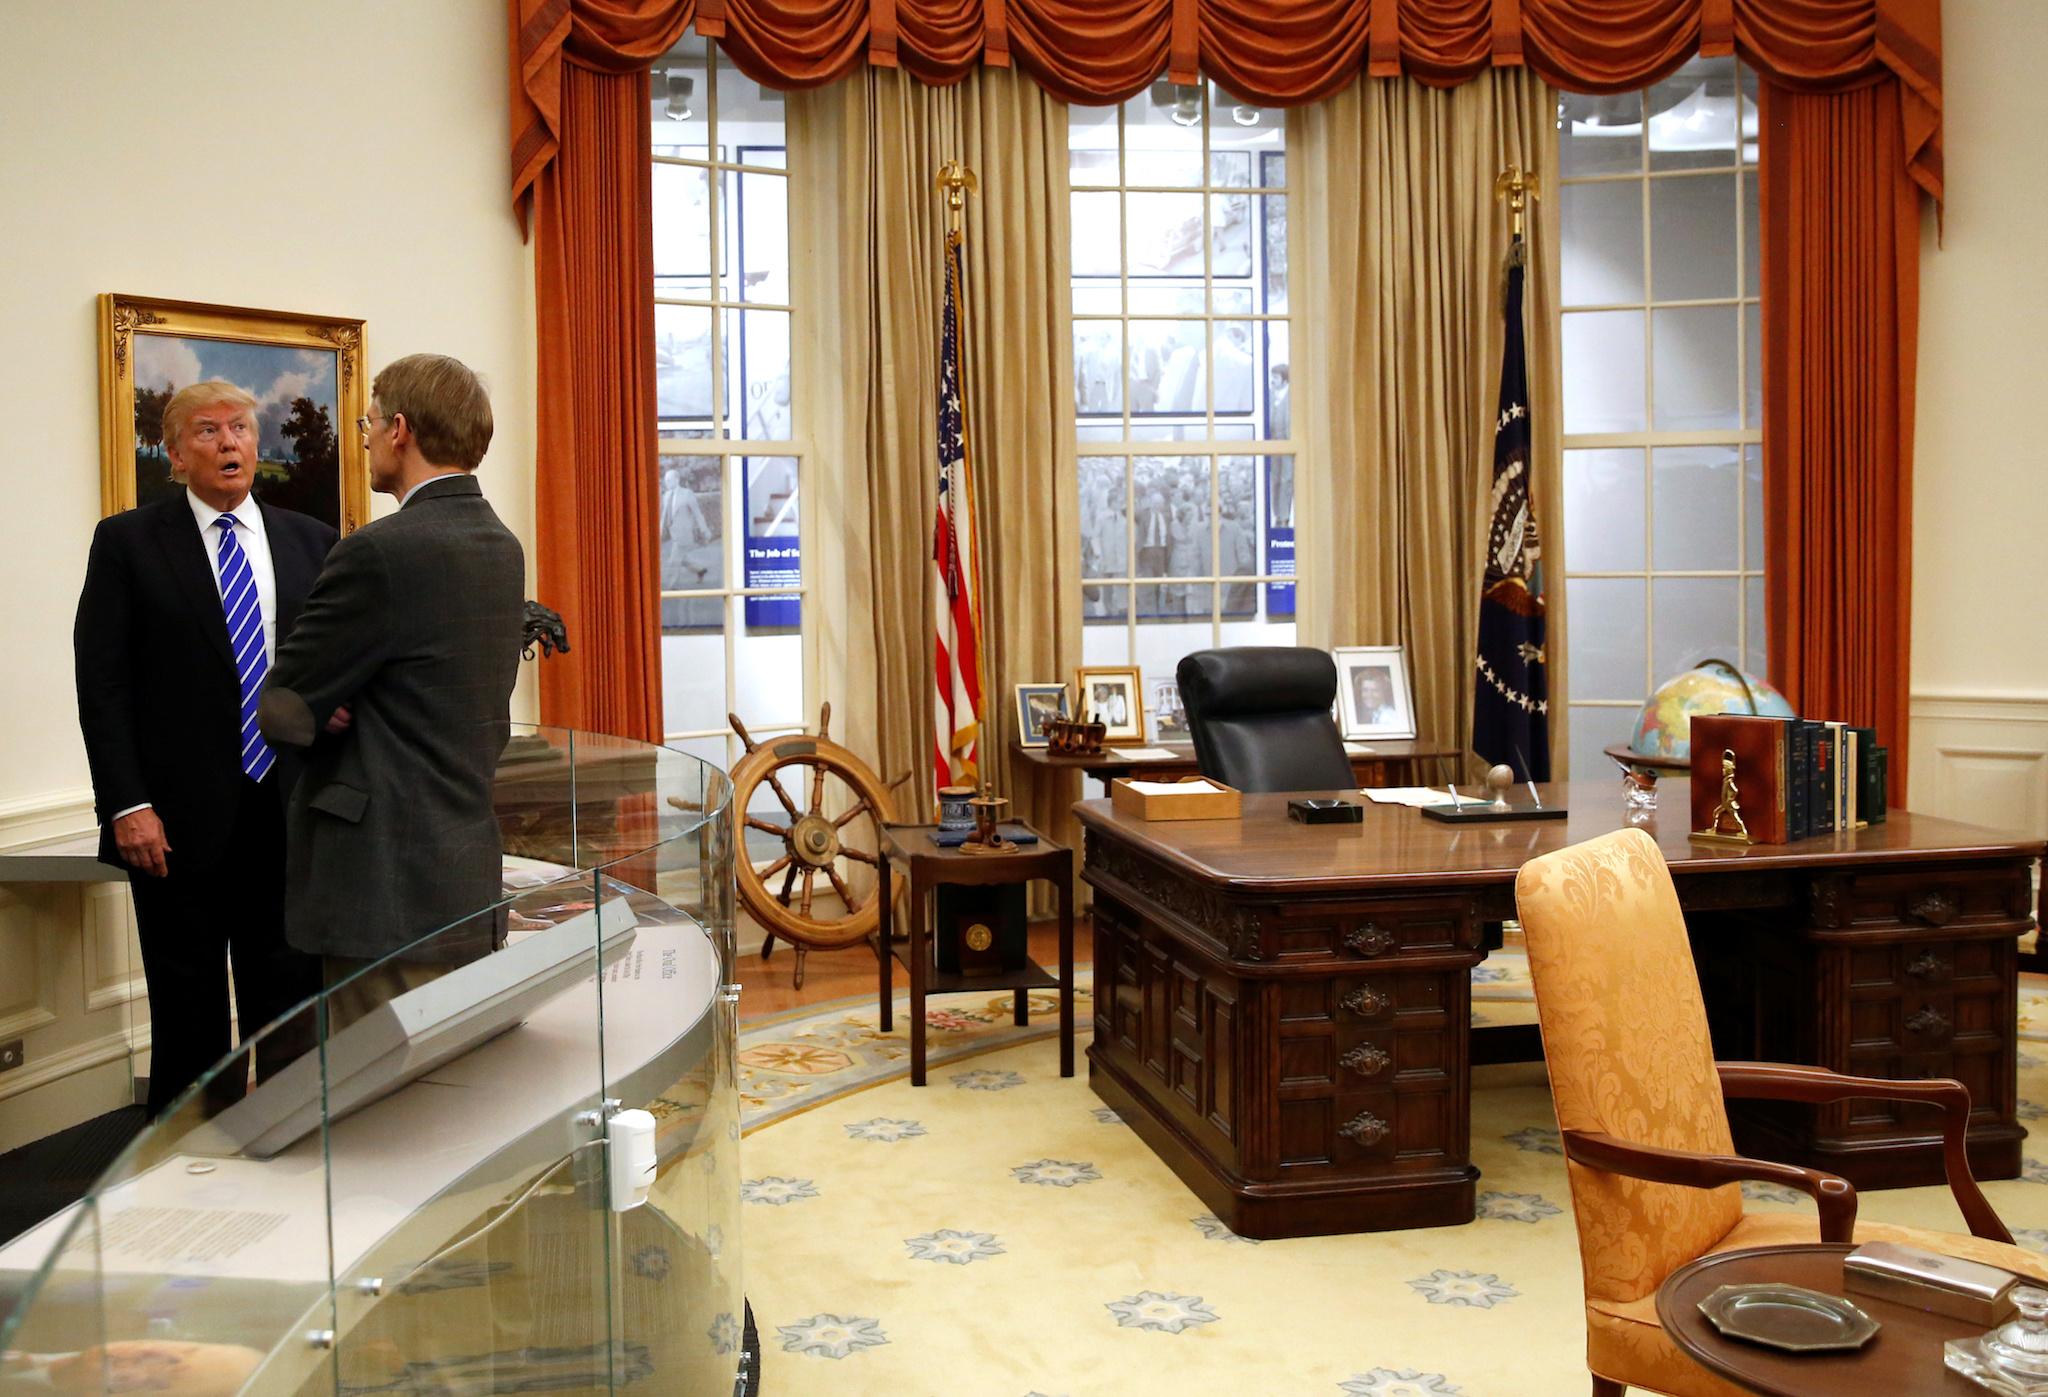 Republican presidential nominee Donald Trump views a replica of the Oval Office on a tour of the Gerald Ford Presidential Museum in Grand Rapids, Michigan, U.S. September 30, 2016